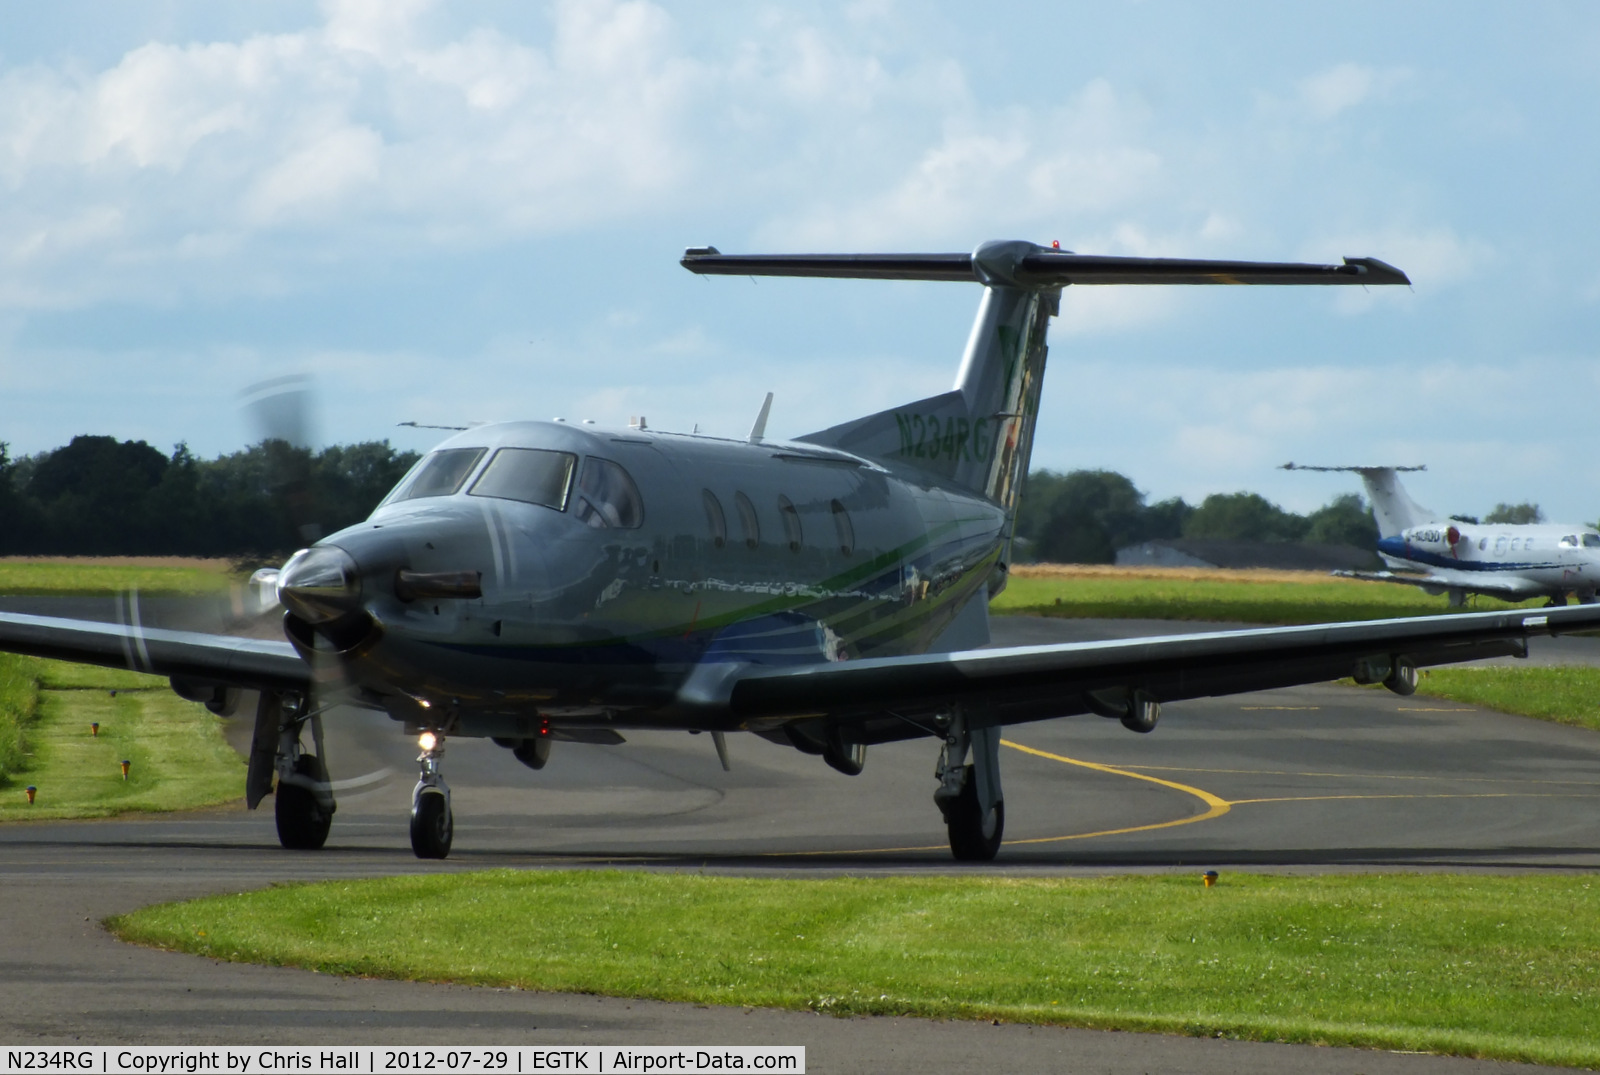 N234RG, 2003 Pilatus PC-12/45 C/N 520, taxiing of the main apron at Oxford, returning to its base at Belfast City Airport, NI